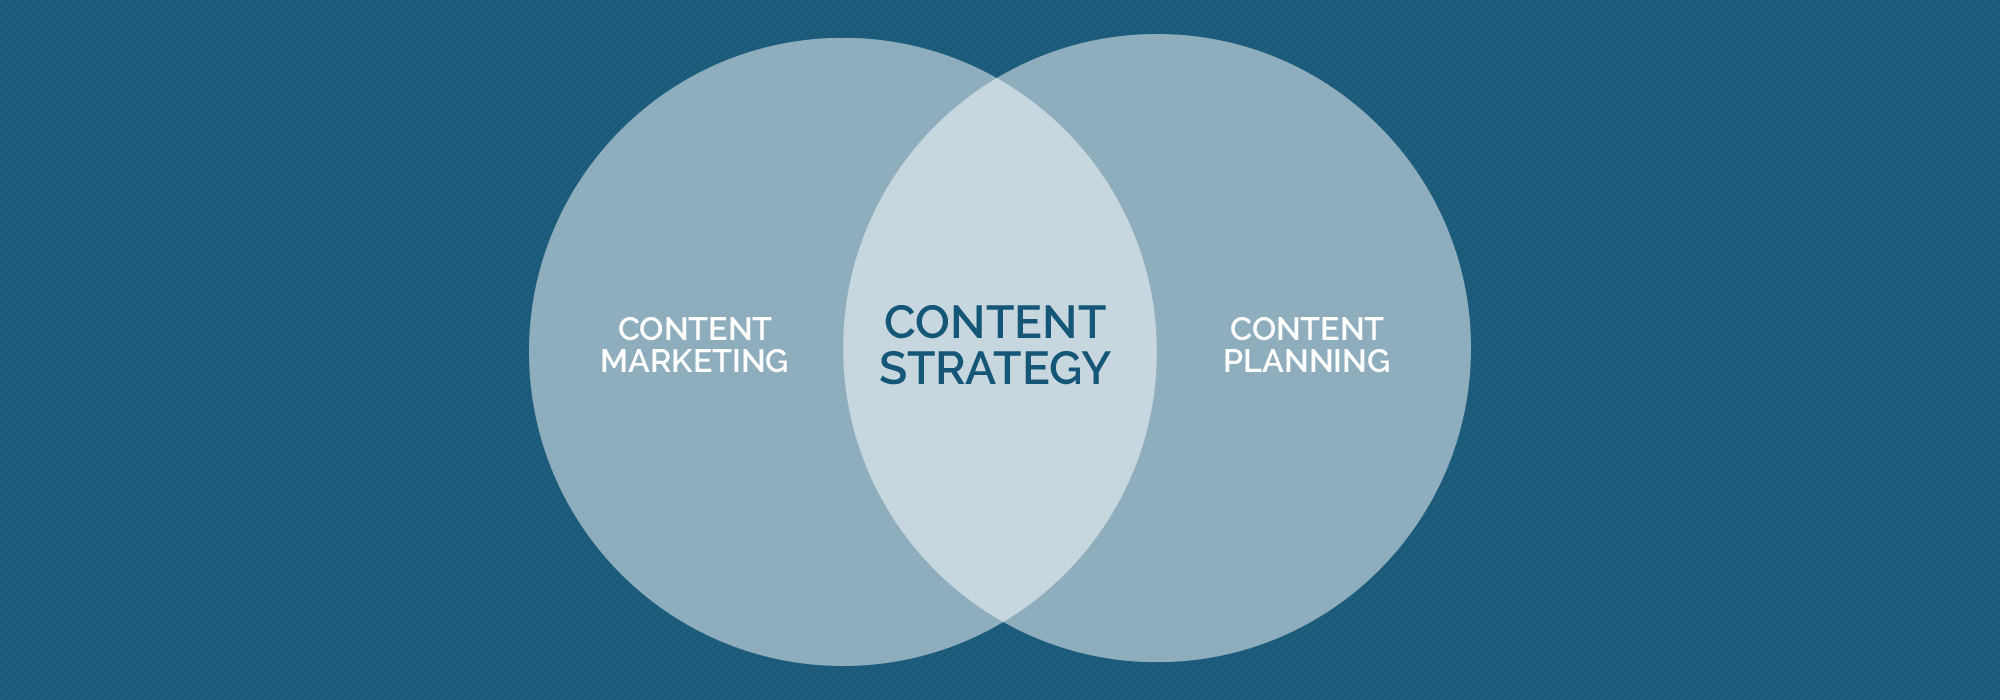 Building an Engaging Content Strategy